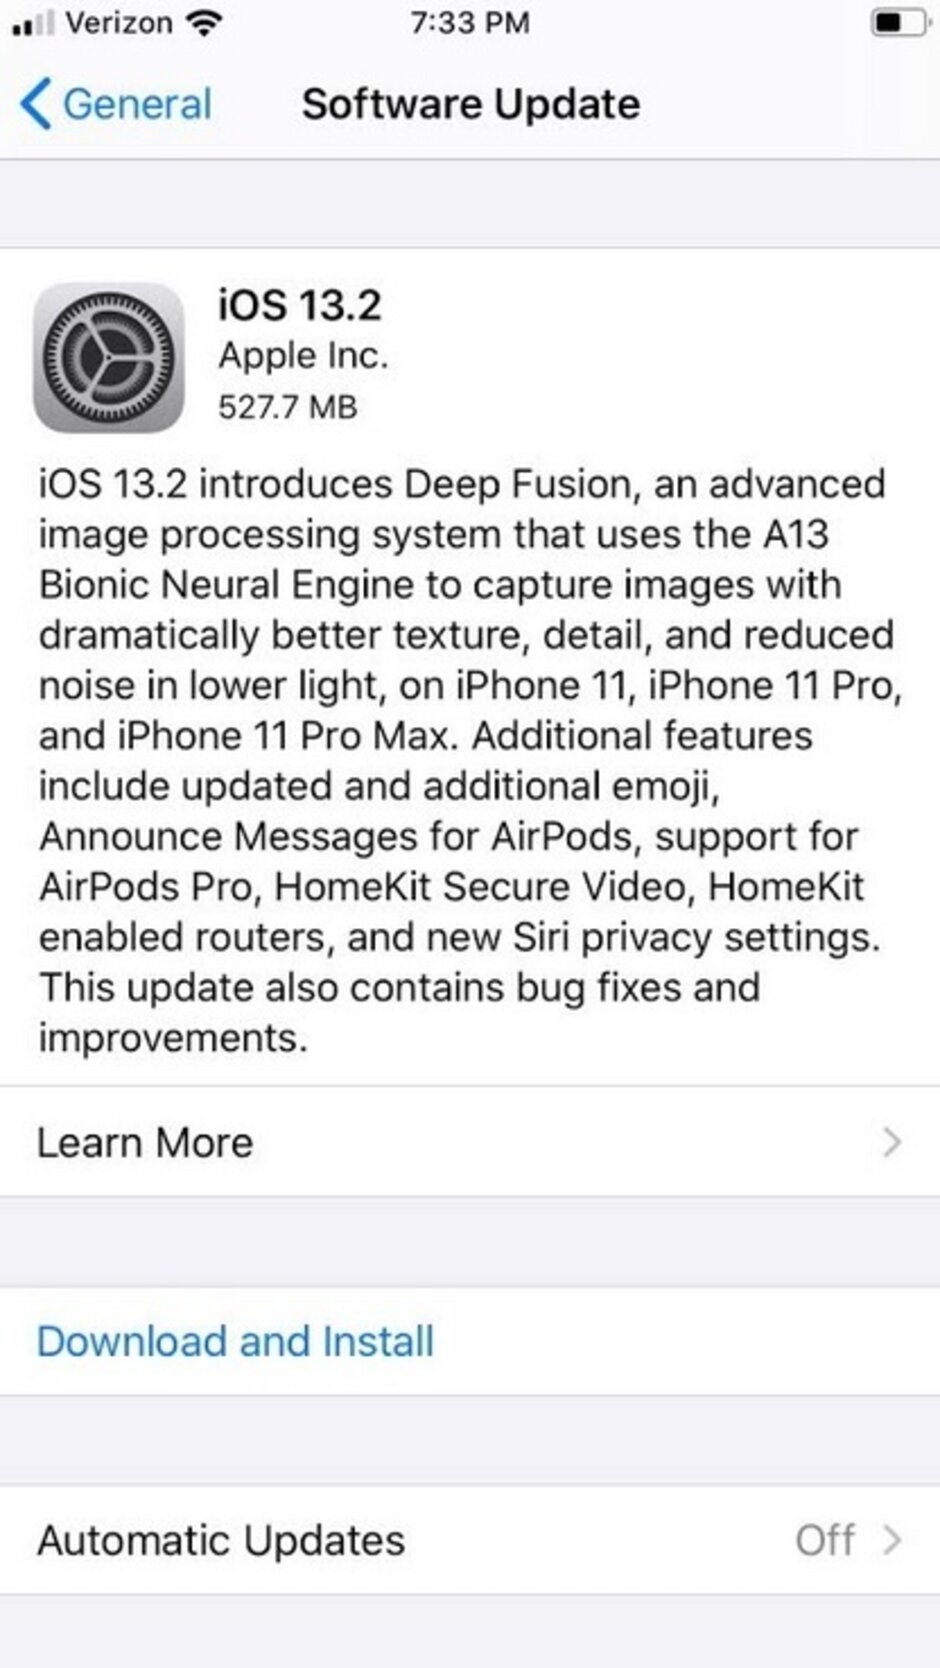 Apple disseminates iOS 13.2 for the iPhone, bringing Deep Fusion to the iPhone 11 and iPhone 11 Pro cameras - Apple releases update that will greatly improve photography on the 2019 iPhones